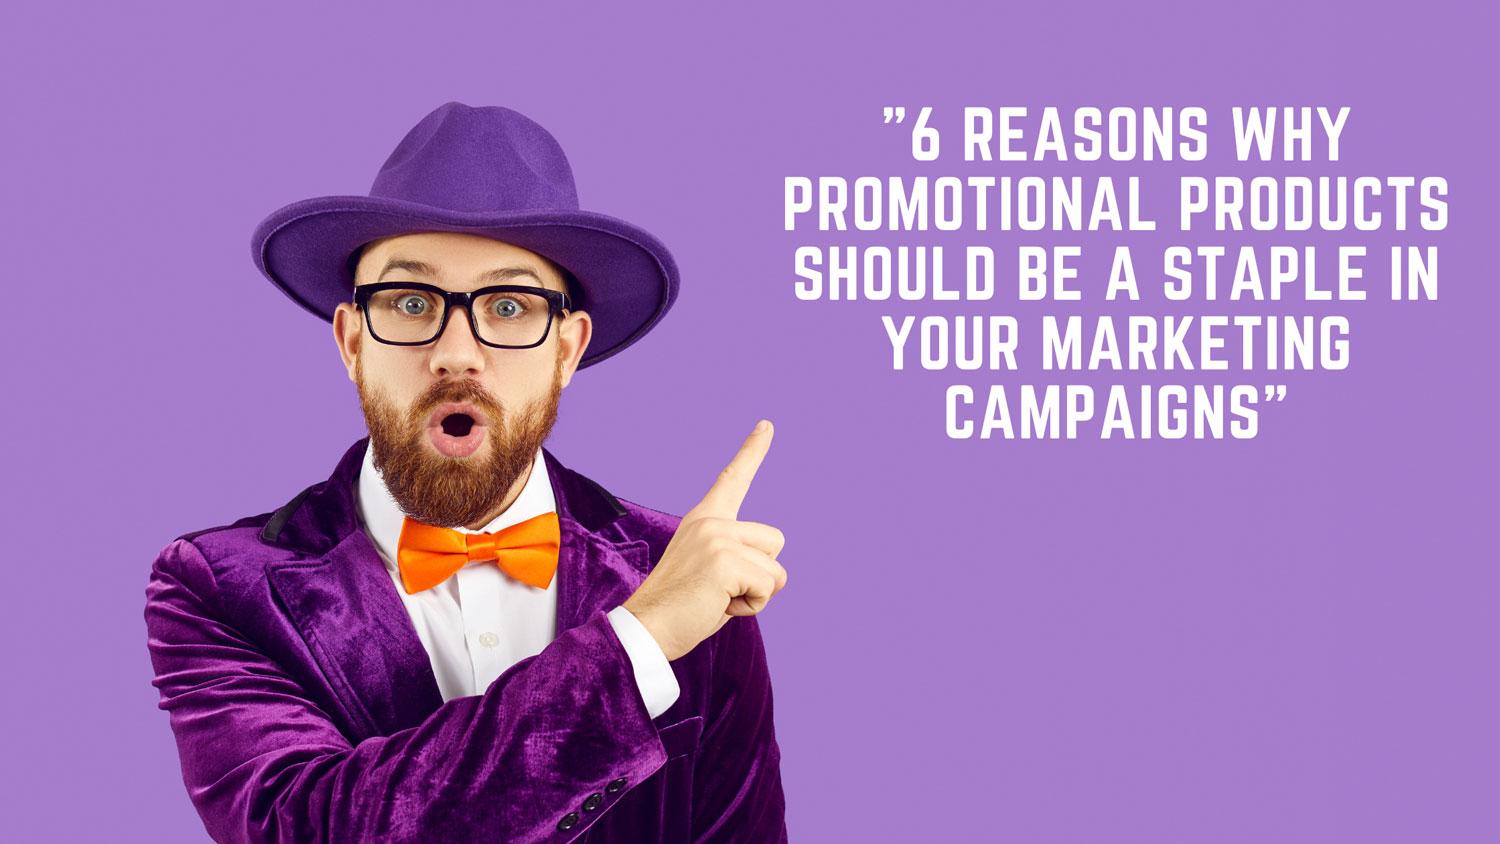 Product: 6 Reasons Why Promotional Products Should Be a Staple in Your Marketing Campaigns - printing companies near me